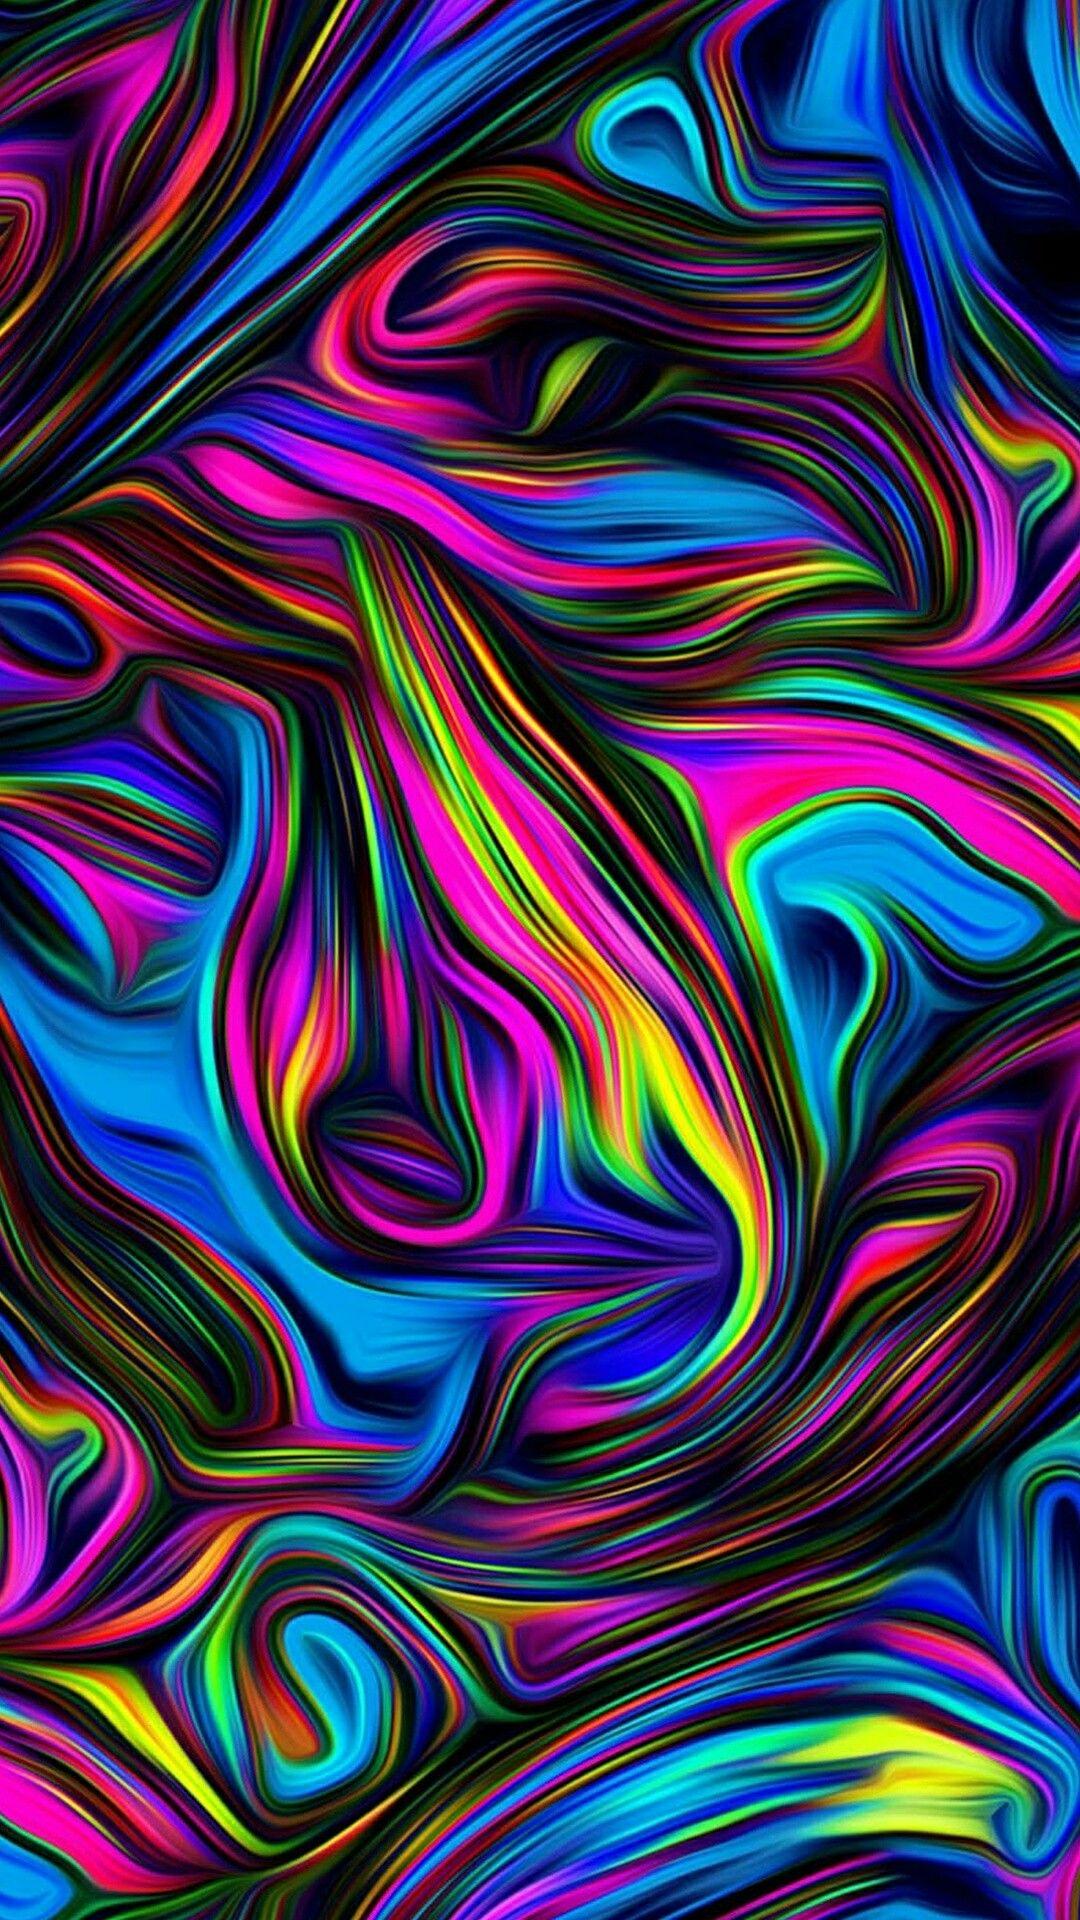 Background. Wallpaper iphone neon, Painting wallpaper, Colorful wallpaper